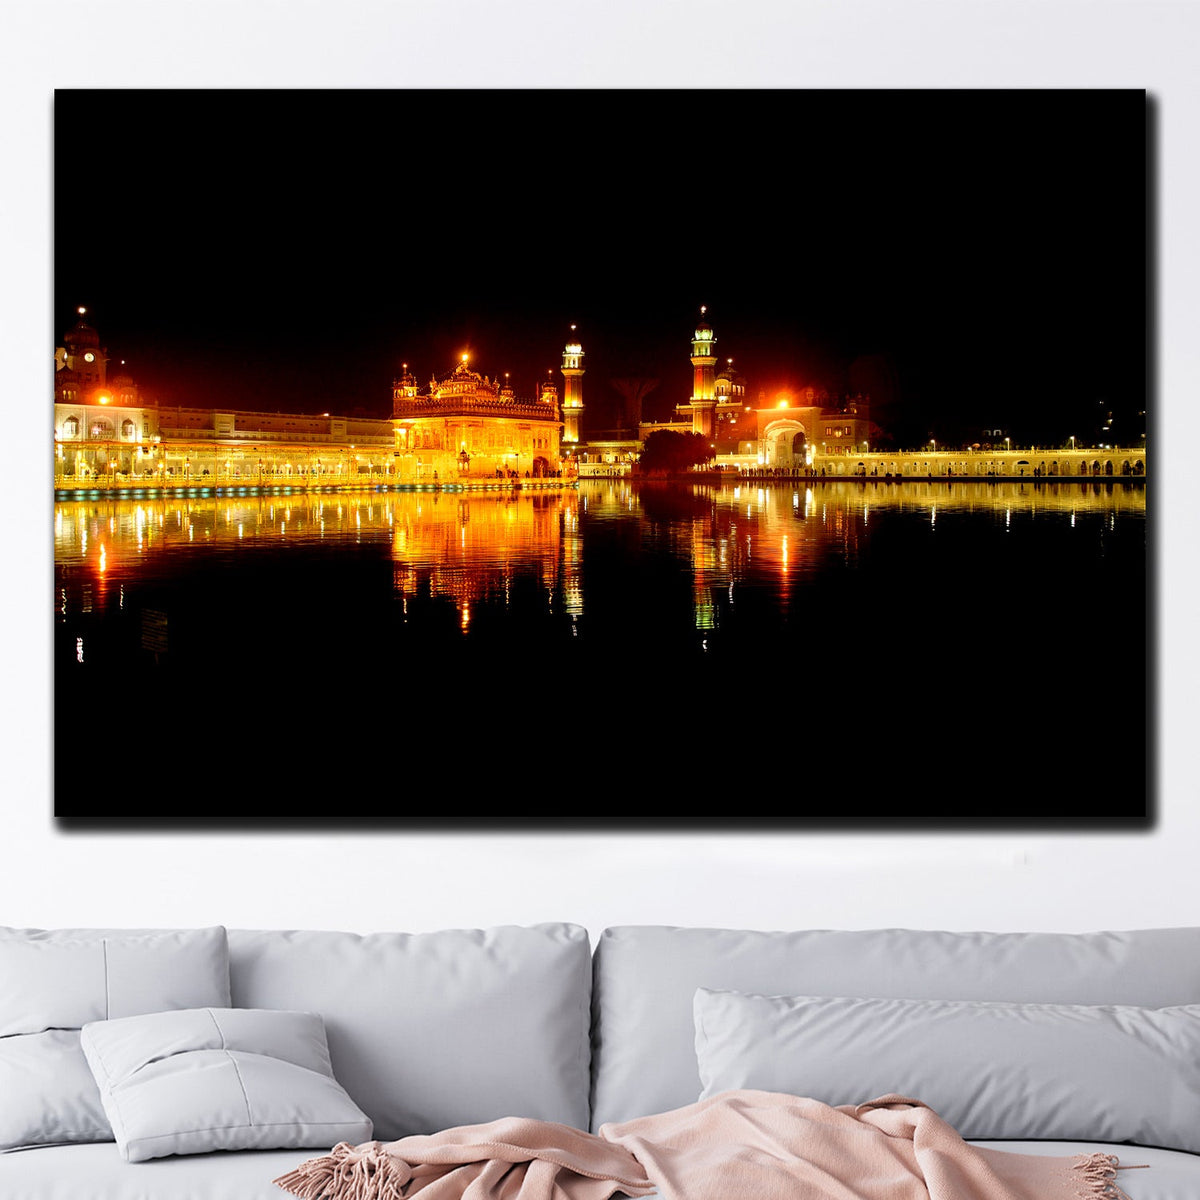 https://cdn.shopify.com/s/files/1/0387/9986/8044/products/TheIconicGoldenTempleCanvasArtprintStretched-3.jpg